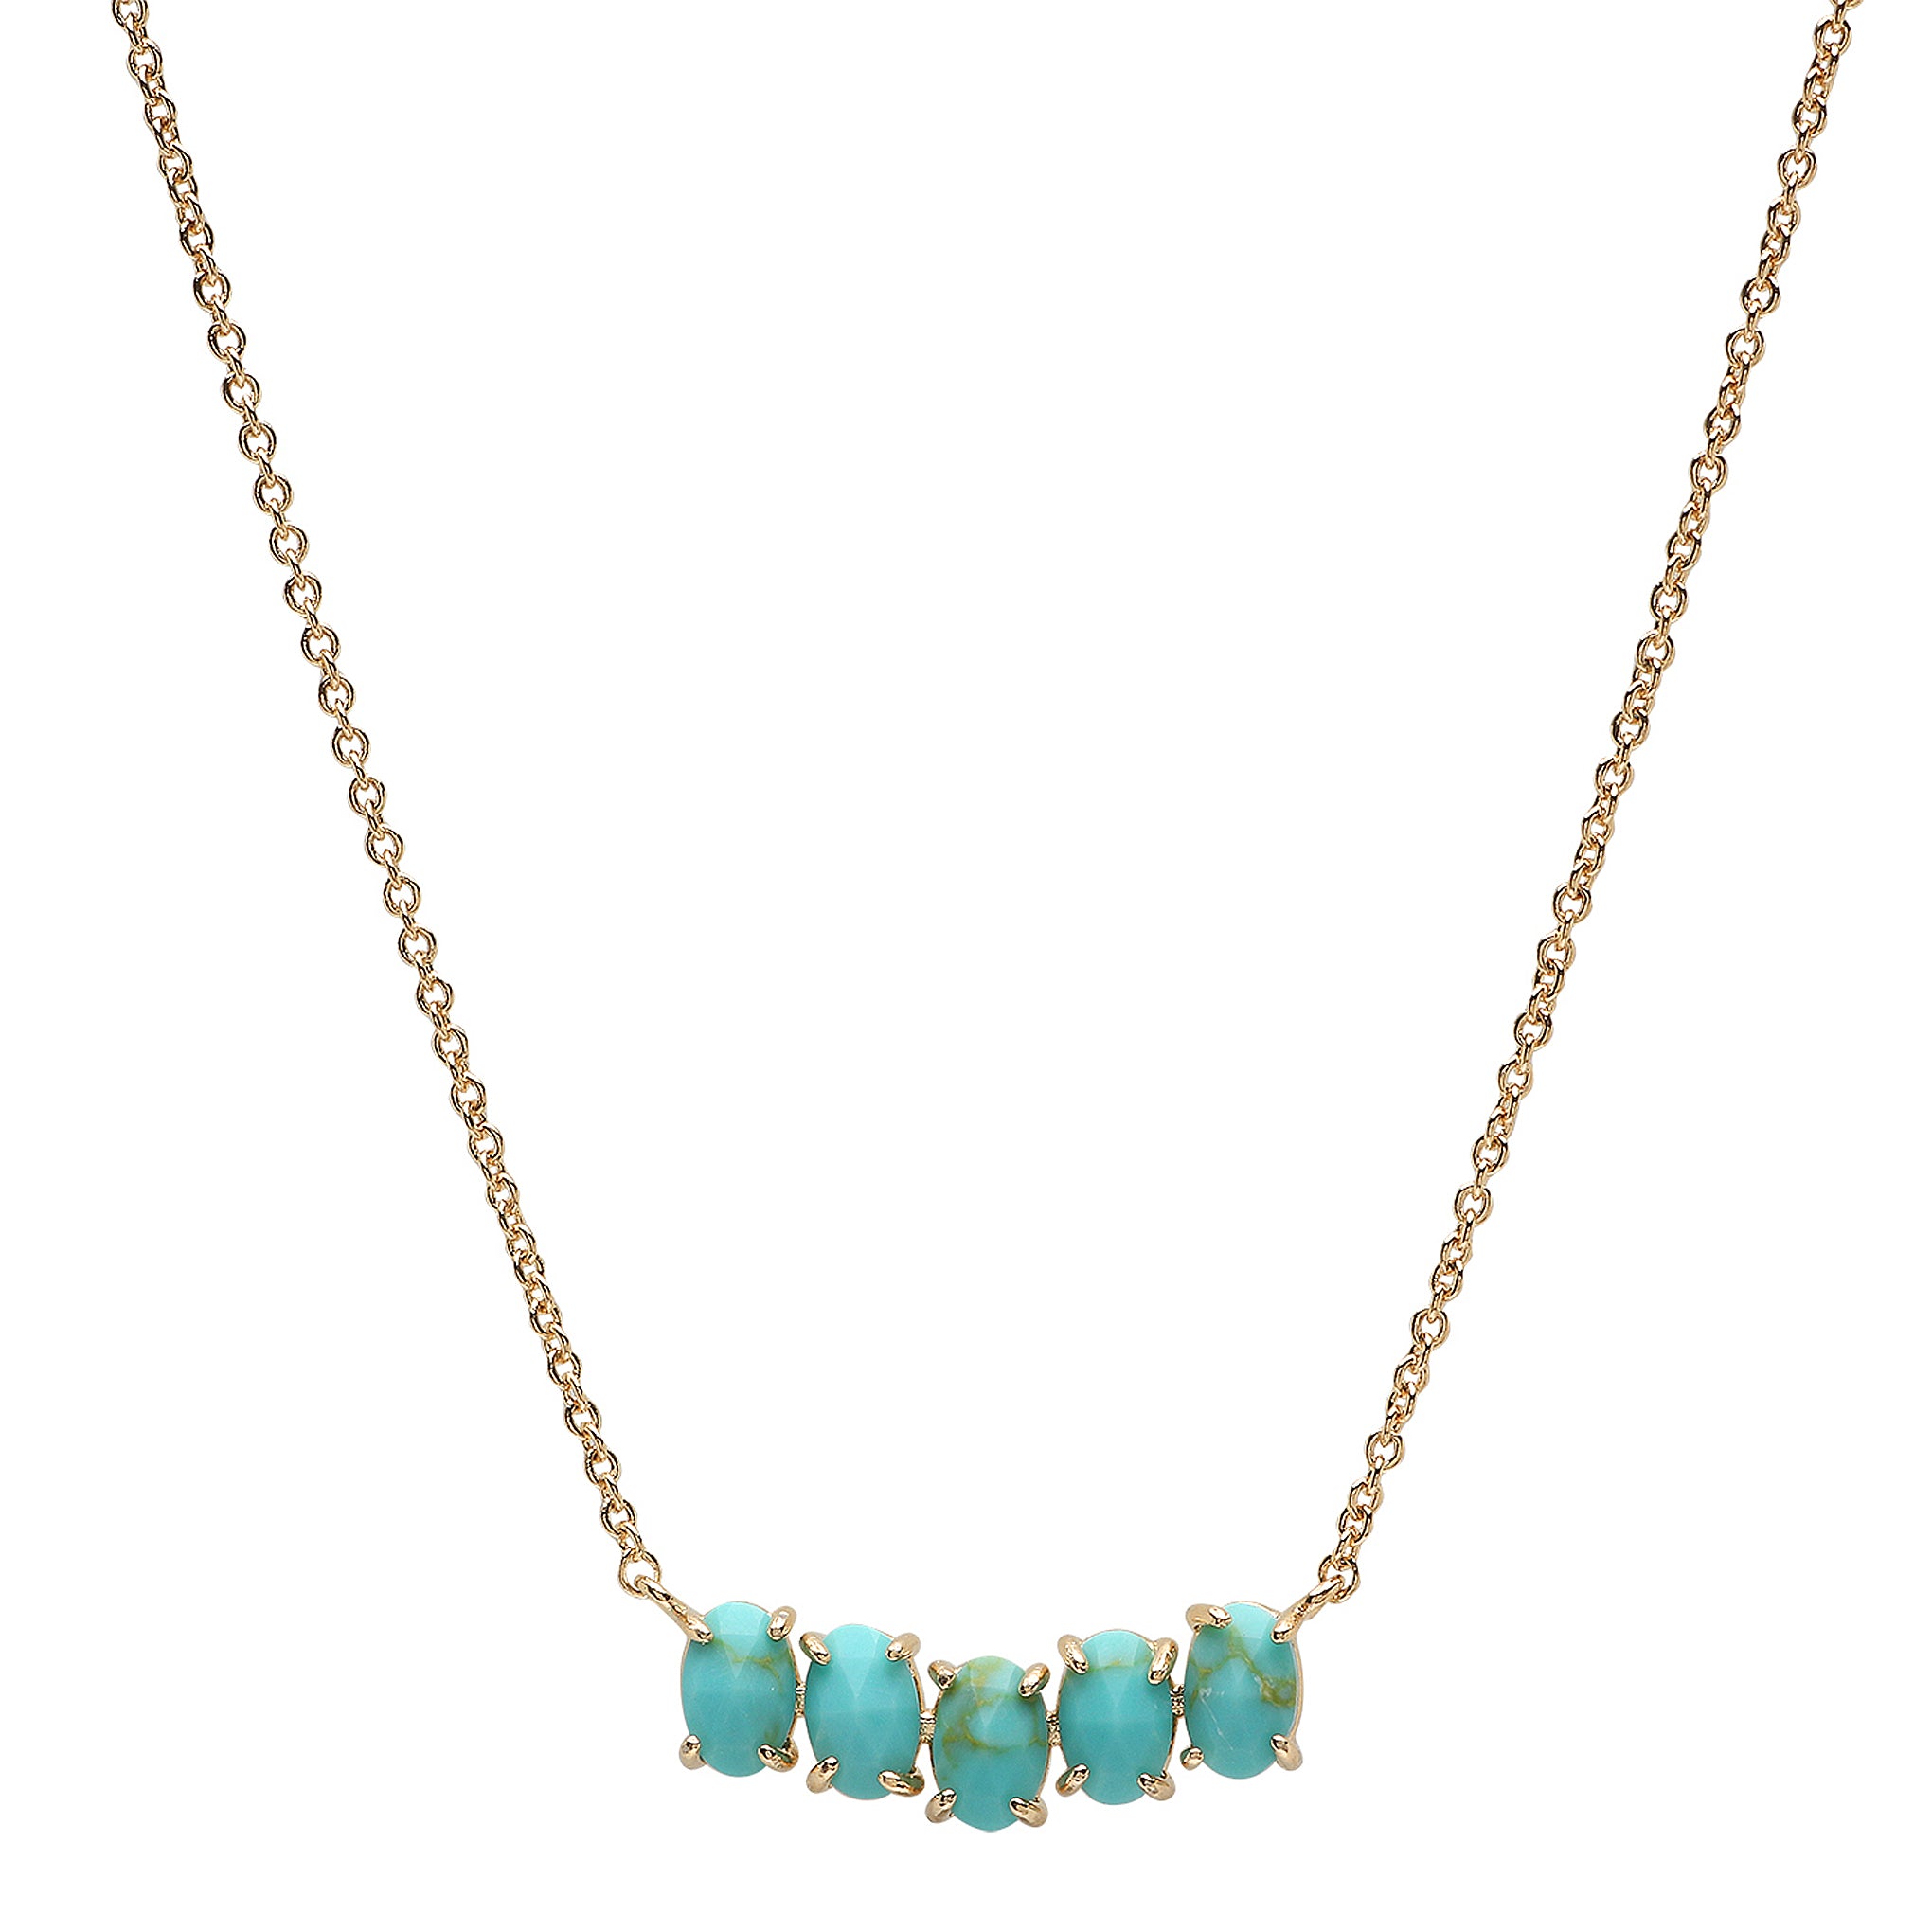 Tai Cluster Birthstone Pendant Necklace in 14k Gold Plated